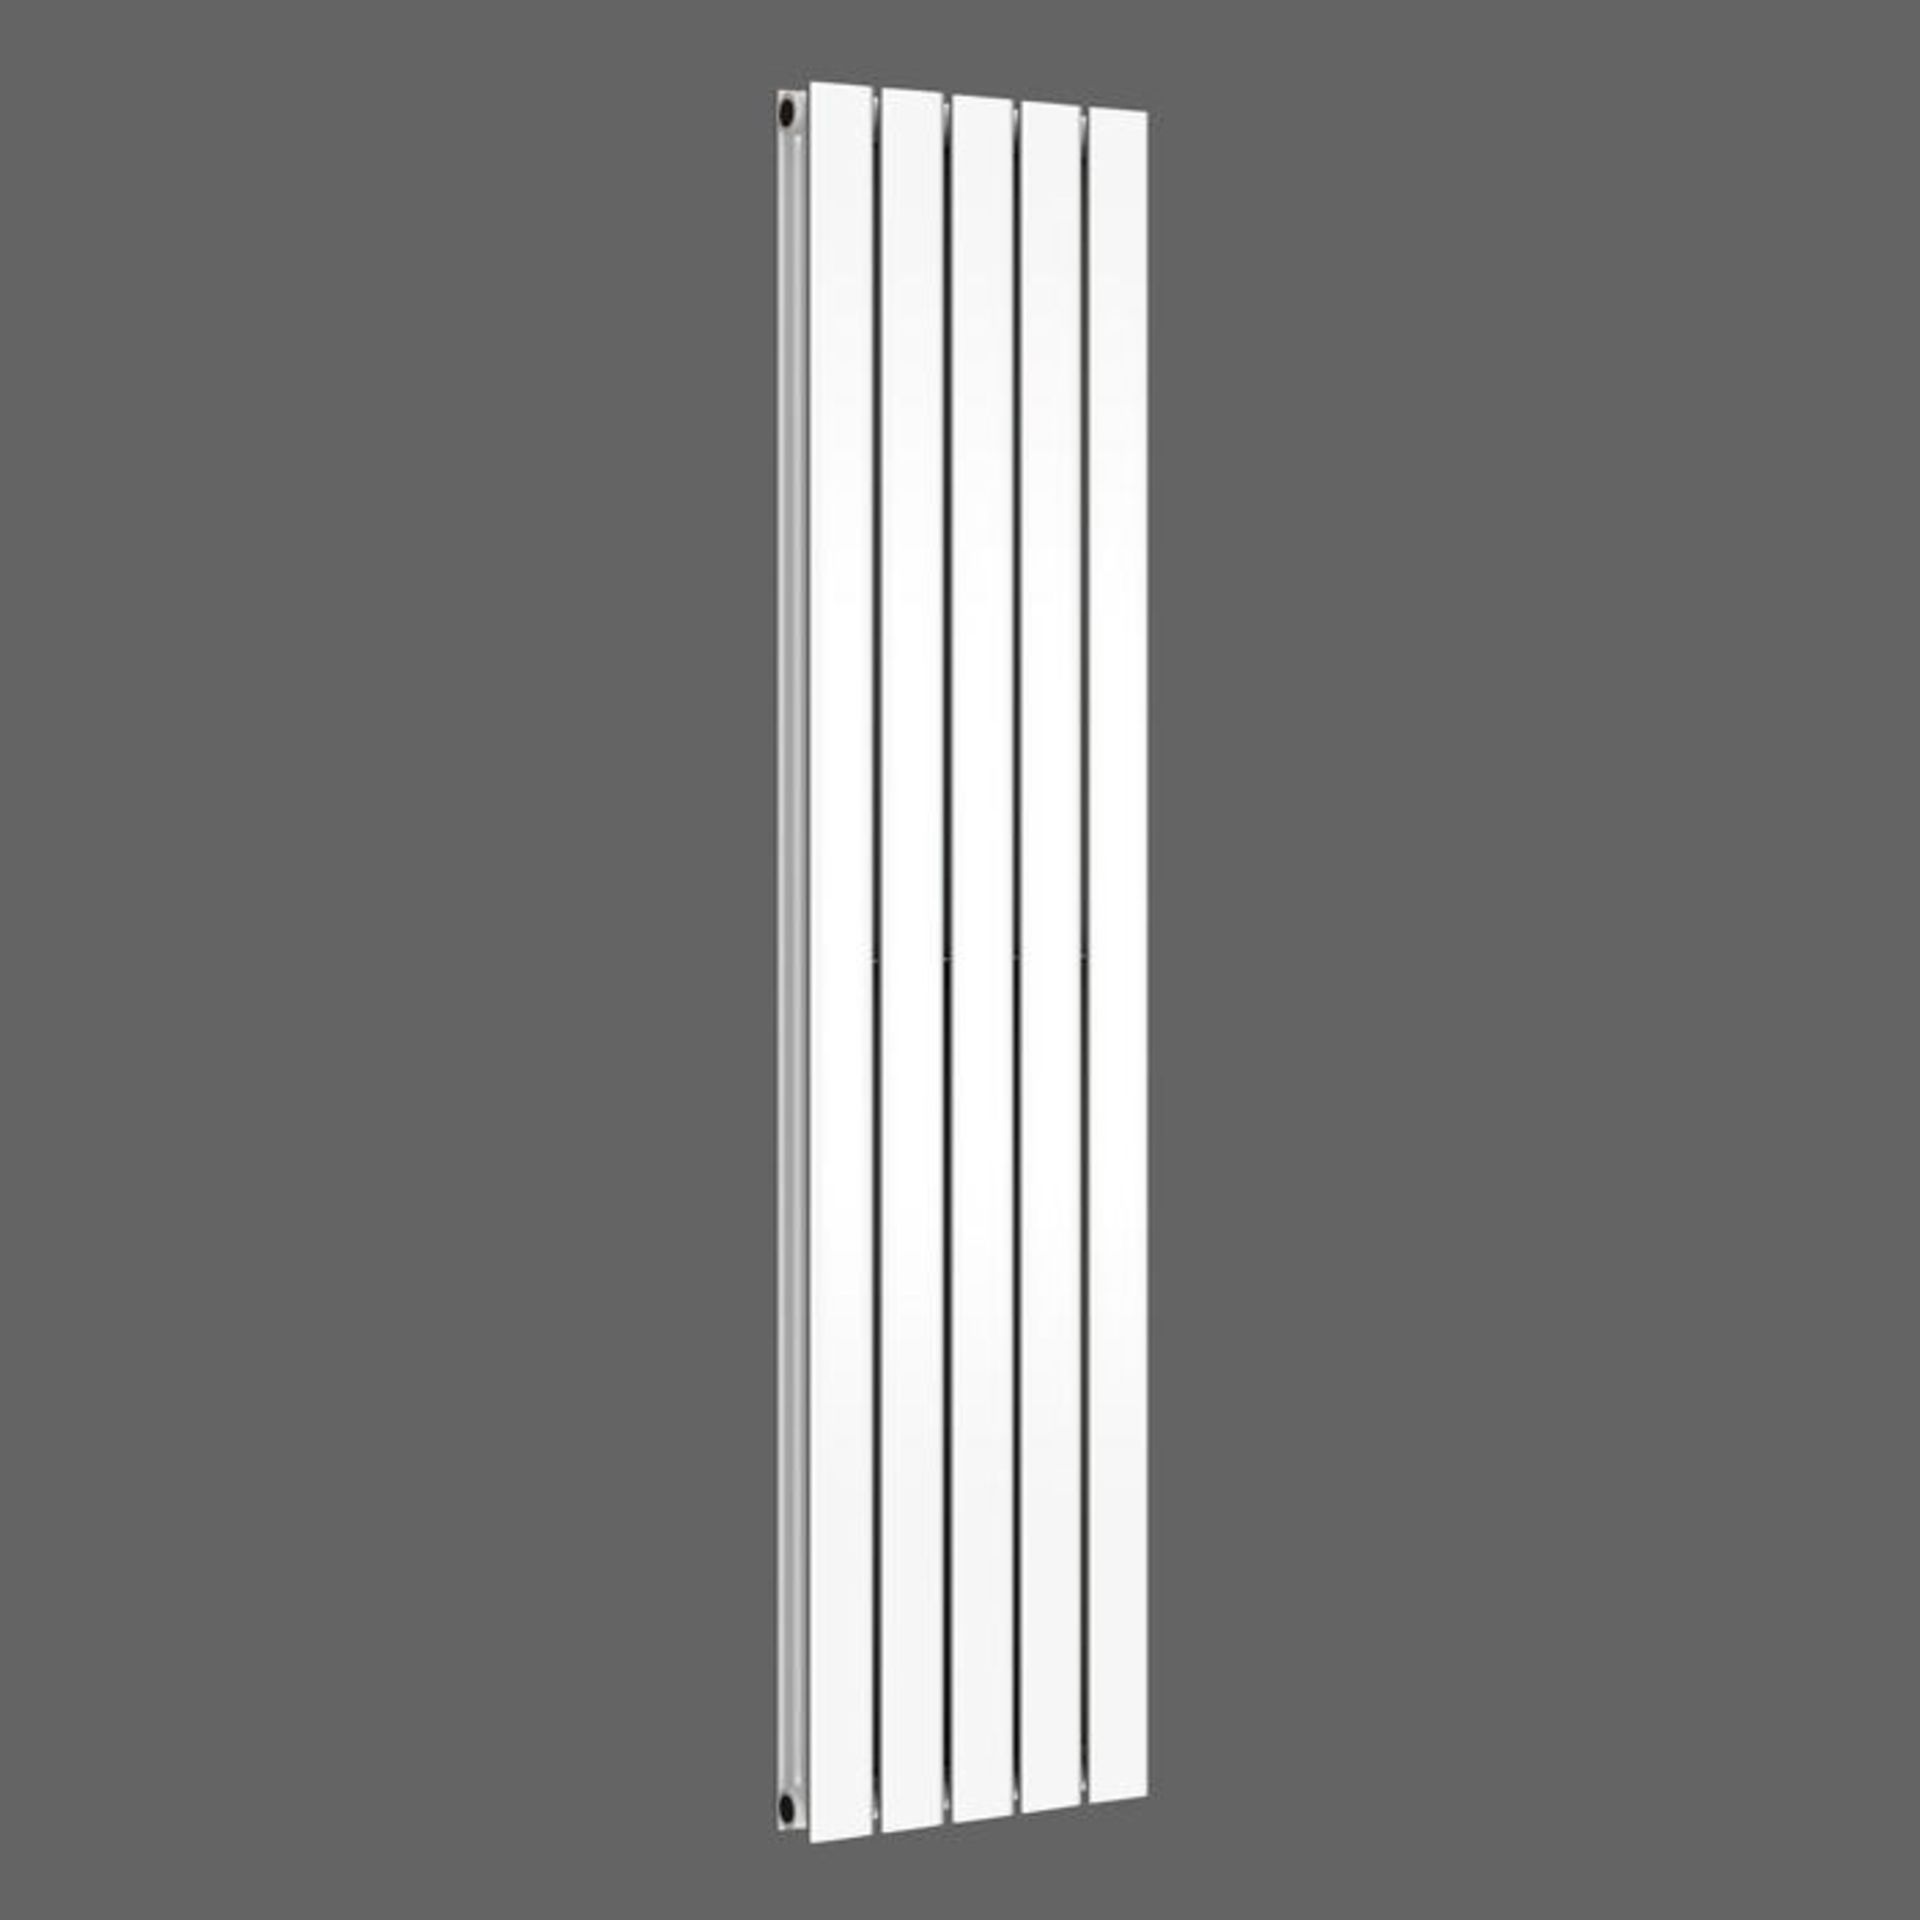 New 1600x360 mm Gloss White Double Flat Panel Vertical Radiator. RRP £382.99.We Love This Becau - Image 2 of 2